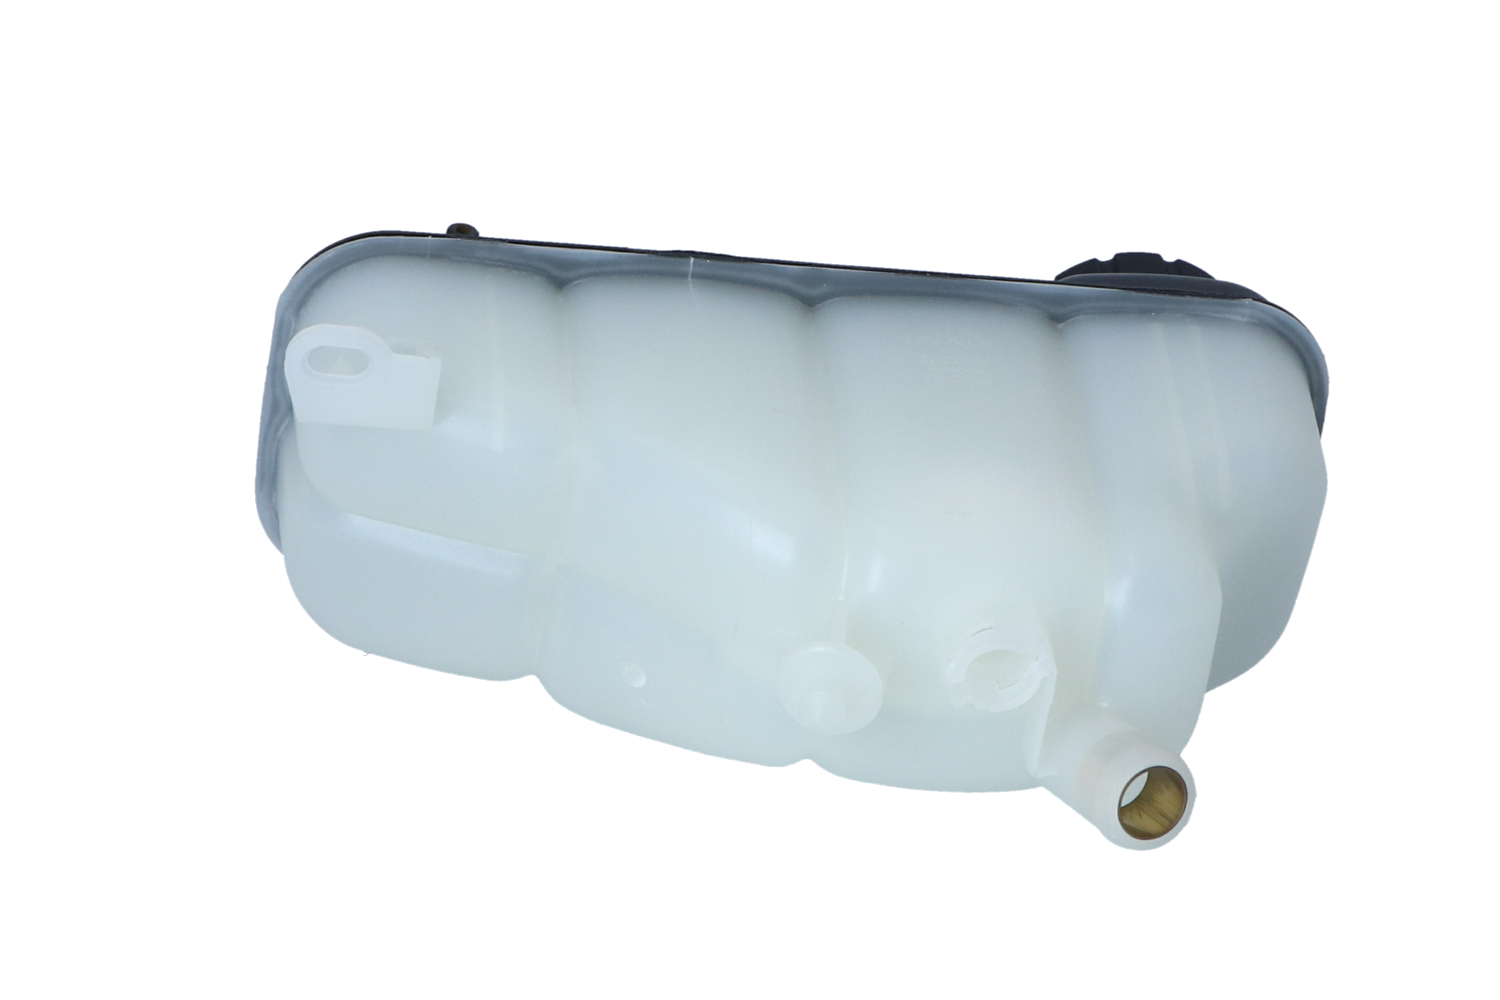 Mercedes C-Class Coolant recovery reservoir 16633688 NRF 454044 online buy